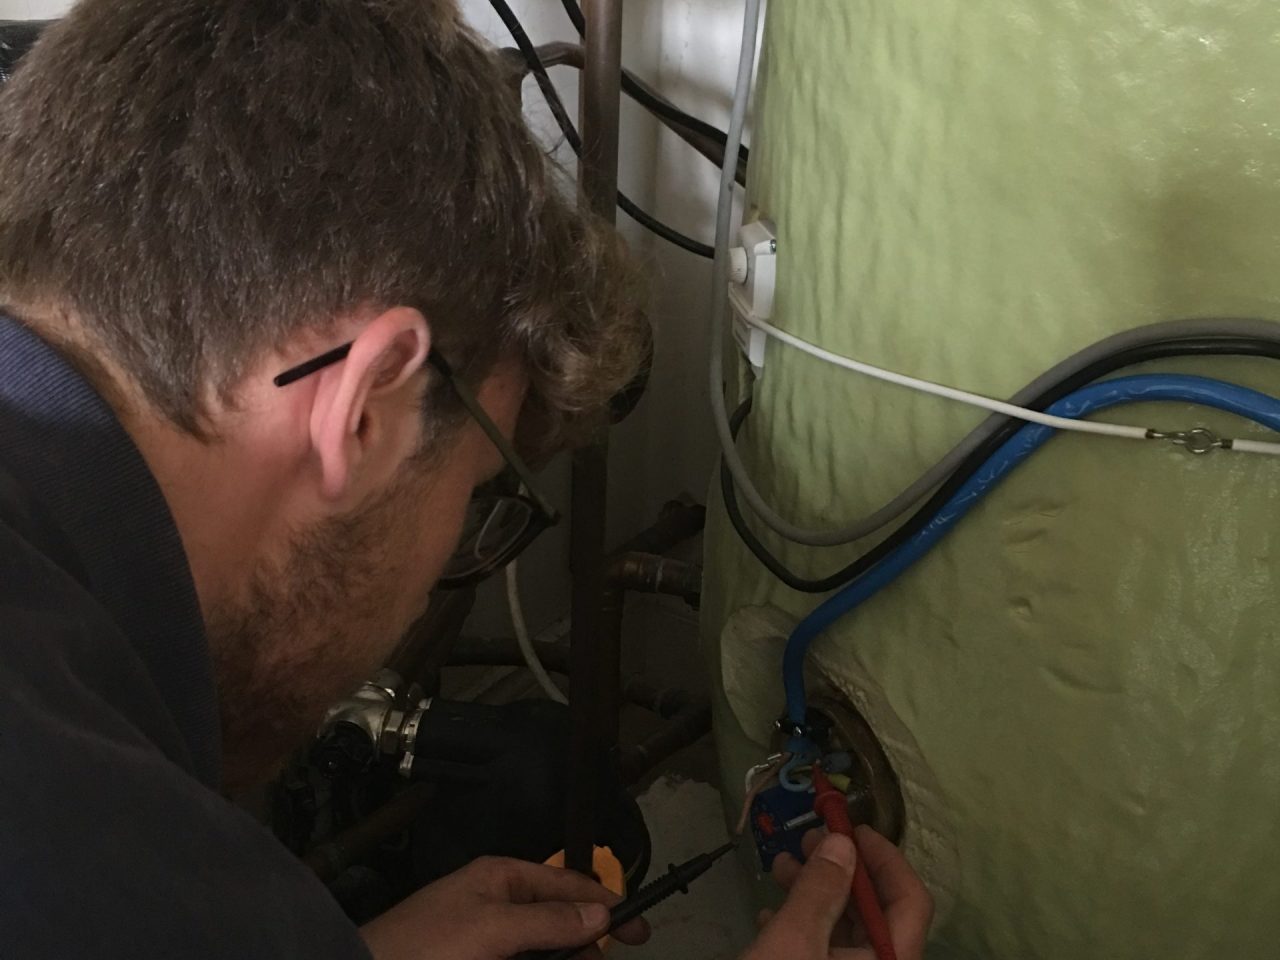 Testing the immersion heater for power